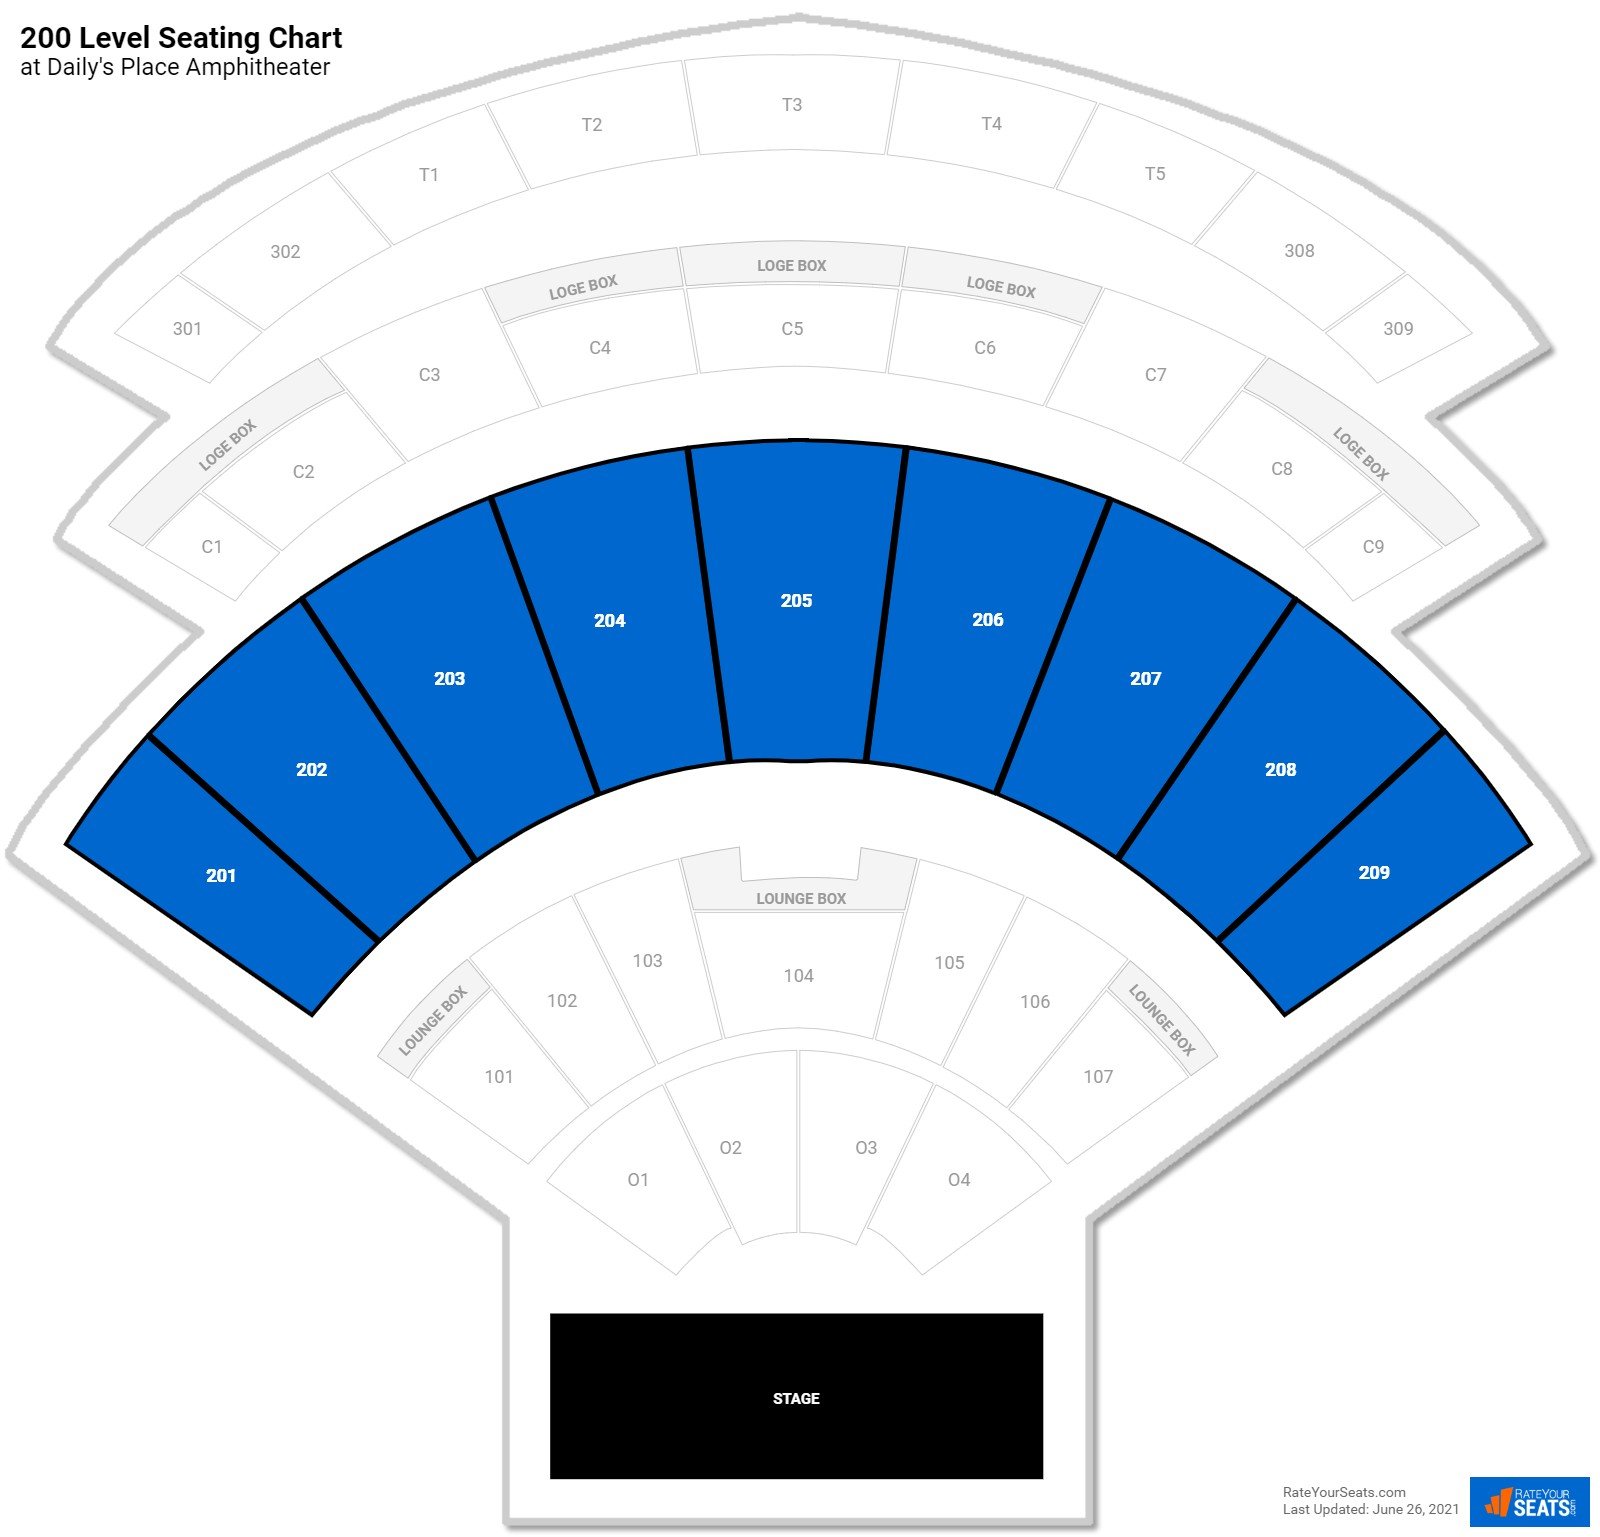 Concert 200 Level Seating Chart at Daily